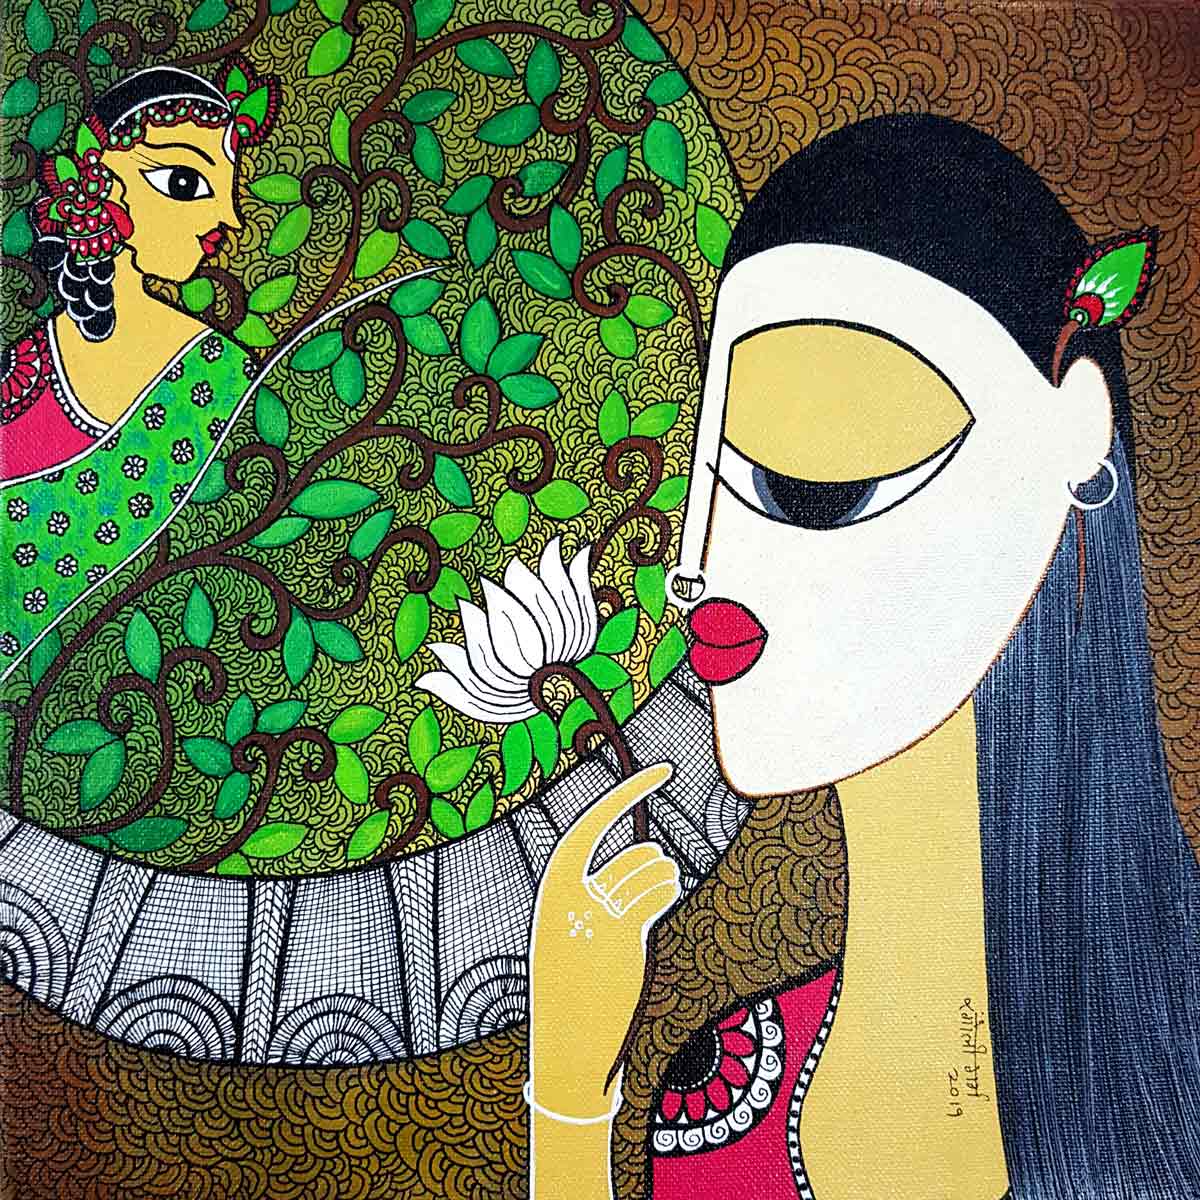 Figurative Painting with Mixed Media on Canvas "Worship" art by Rangoli Garg